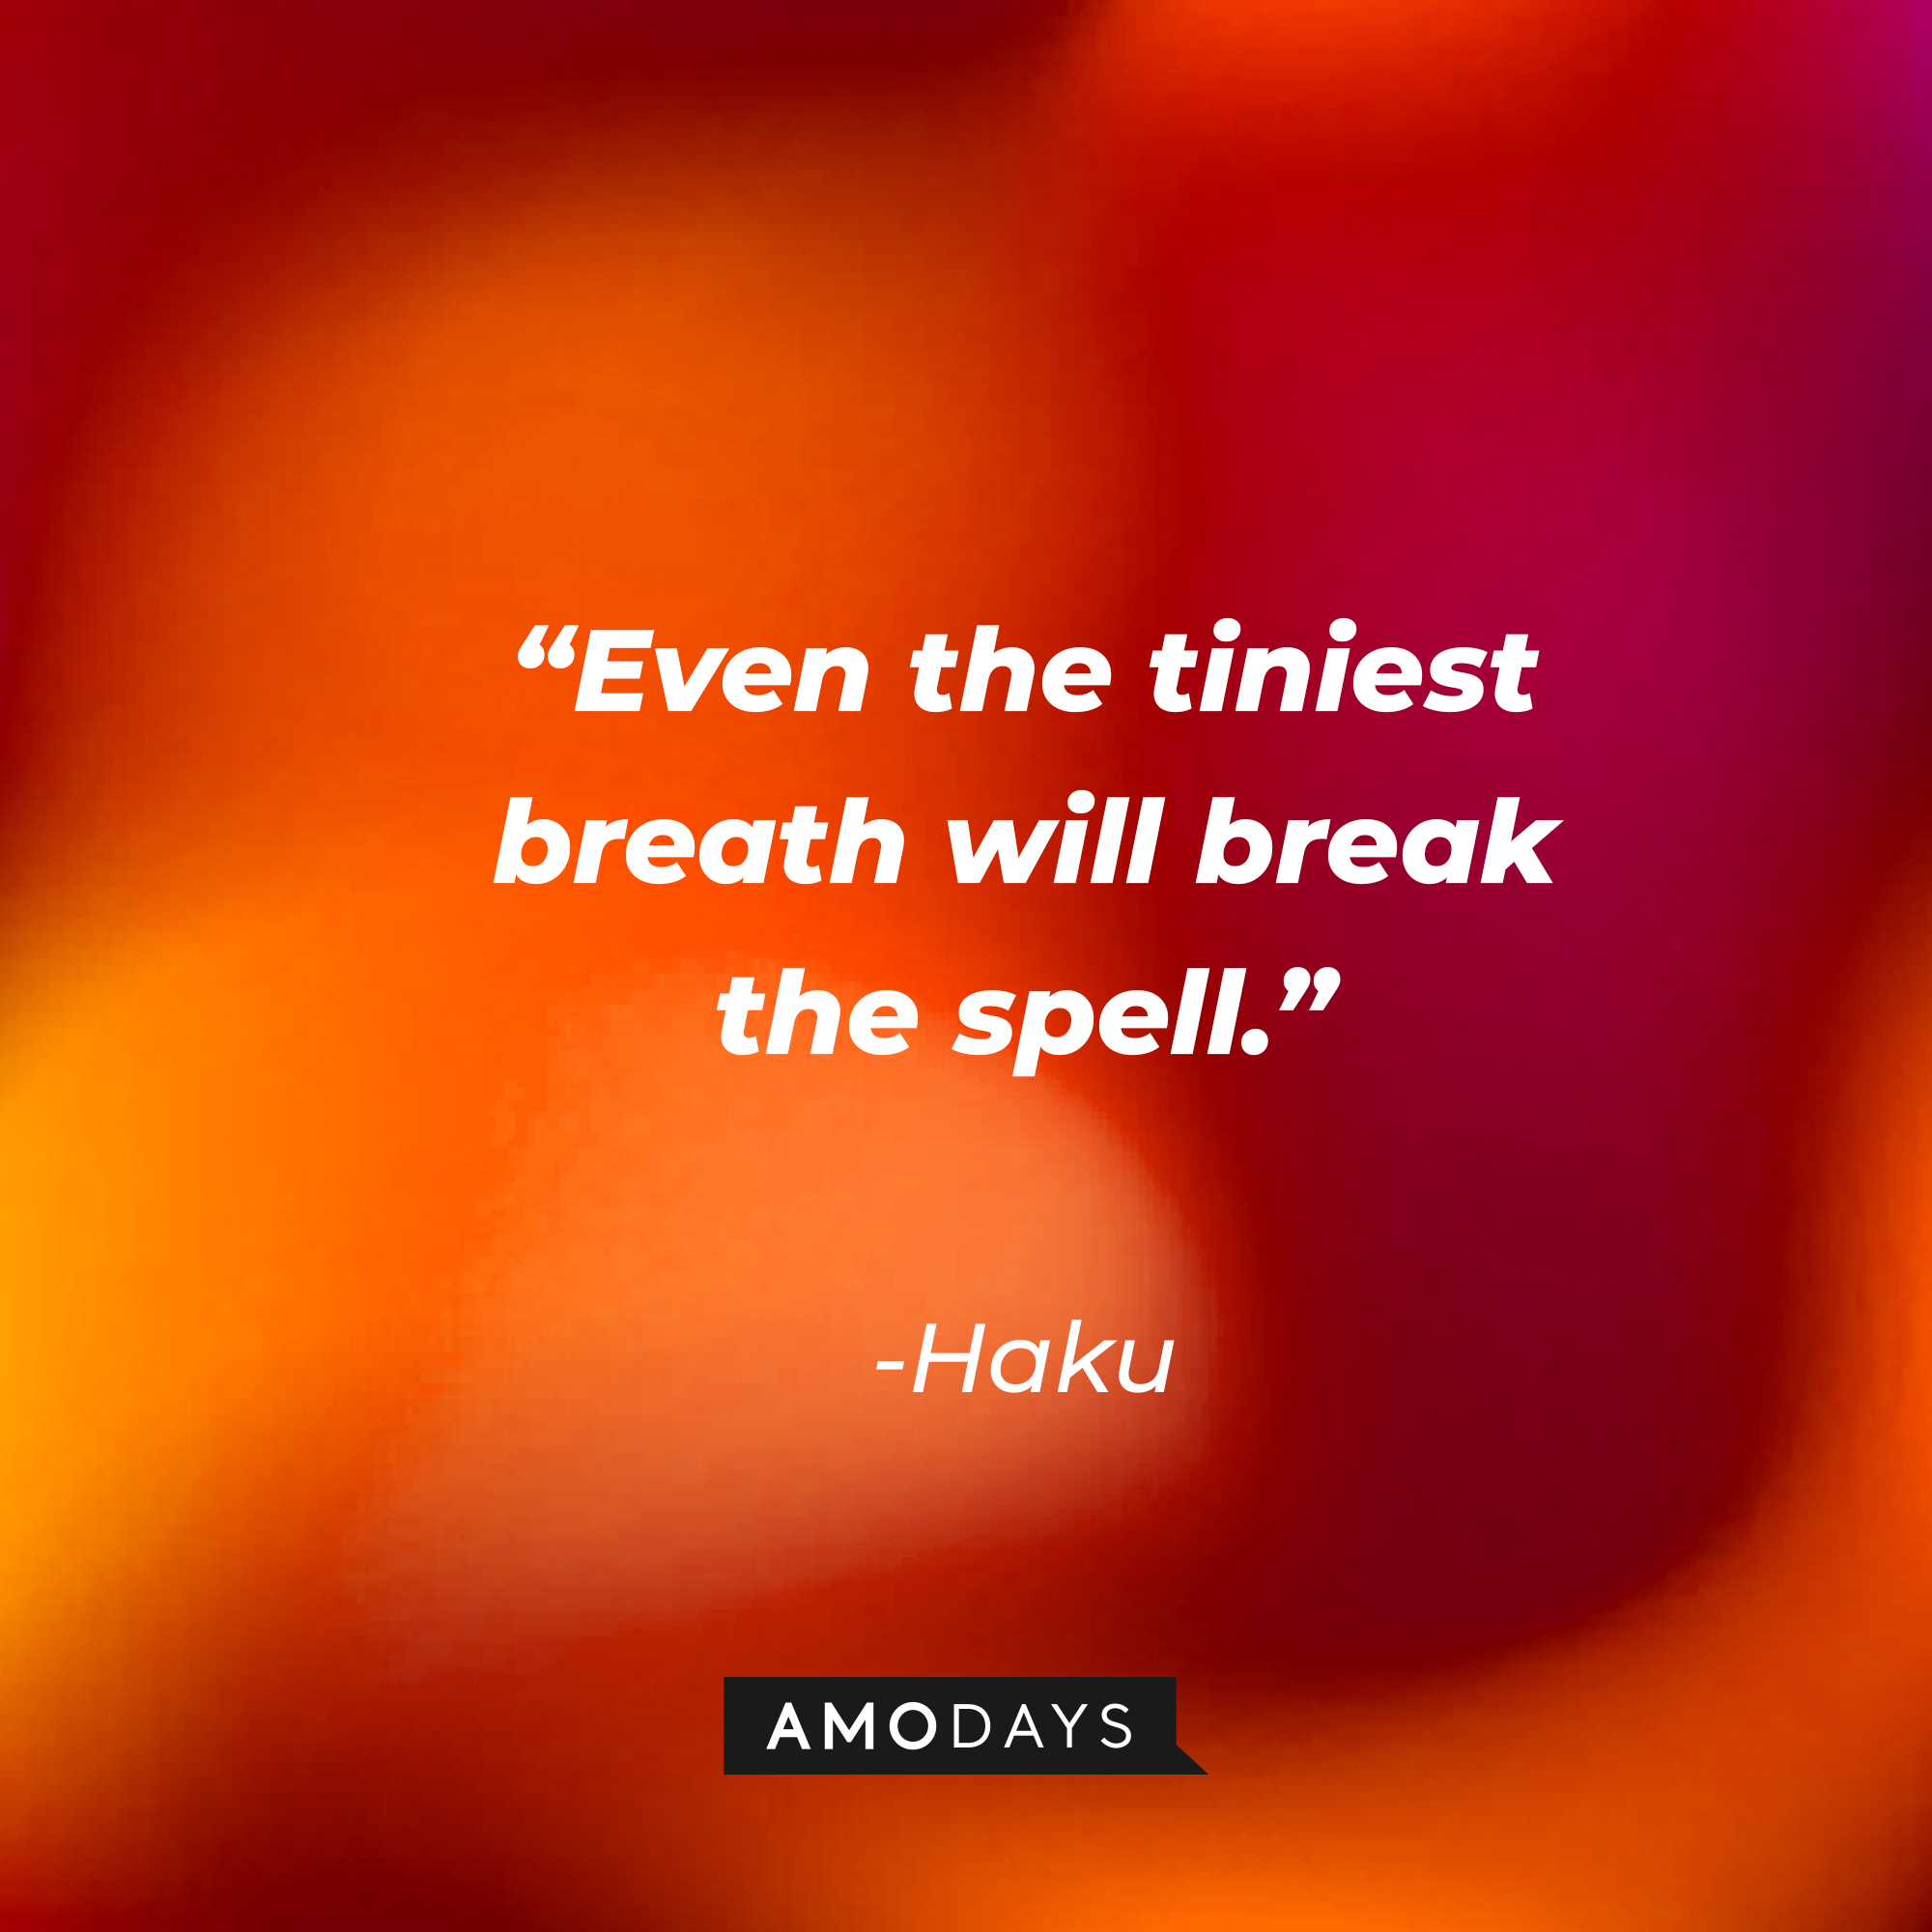 Haku's quote: “Even the tiniest breath will break the spell.” | Source: AmoDays